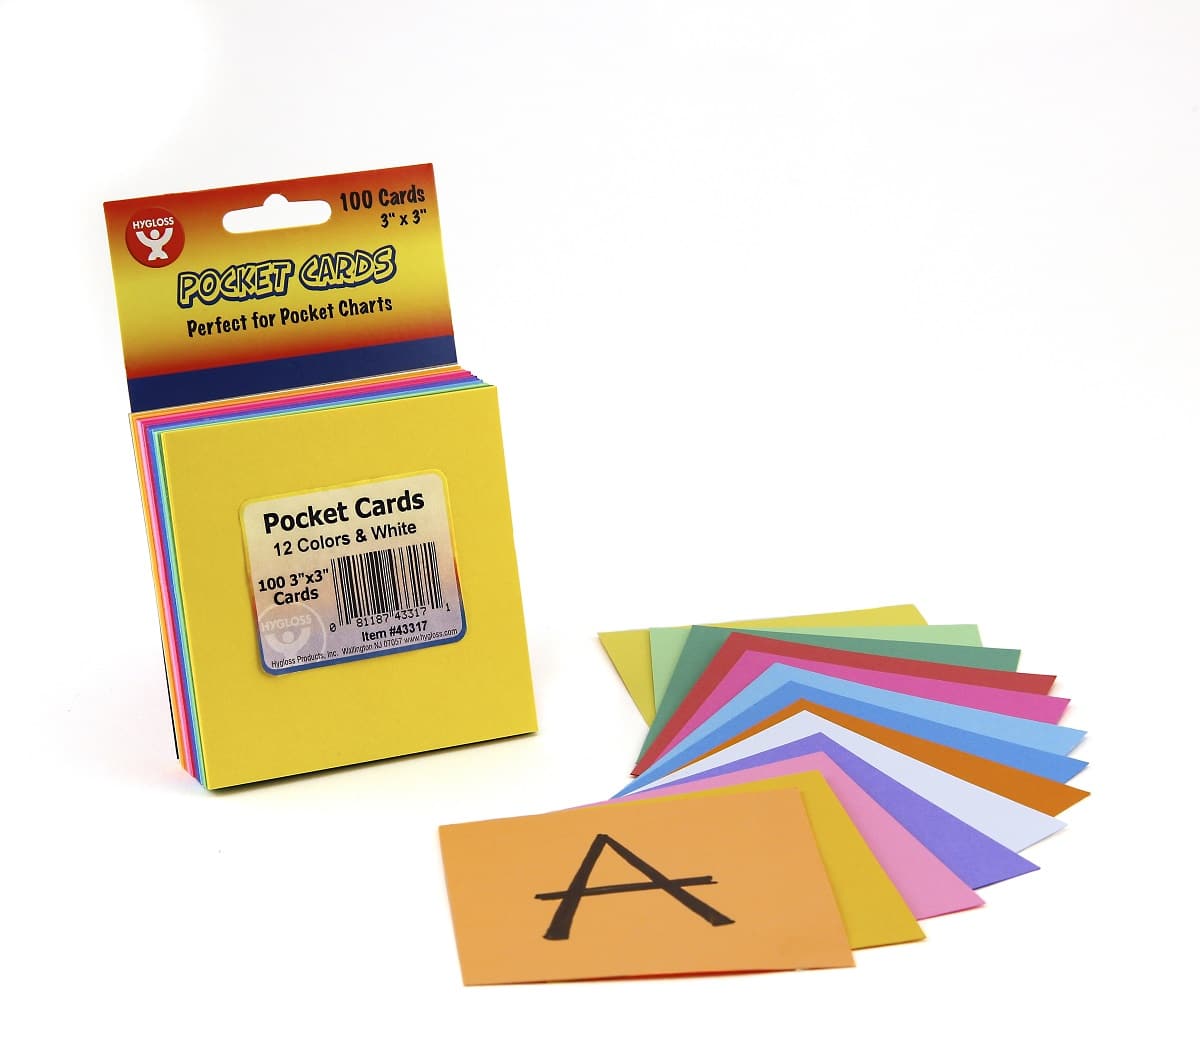 Pocket Chart Products